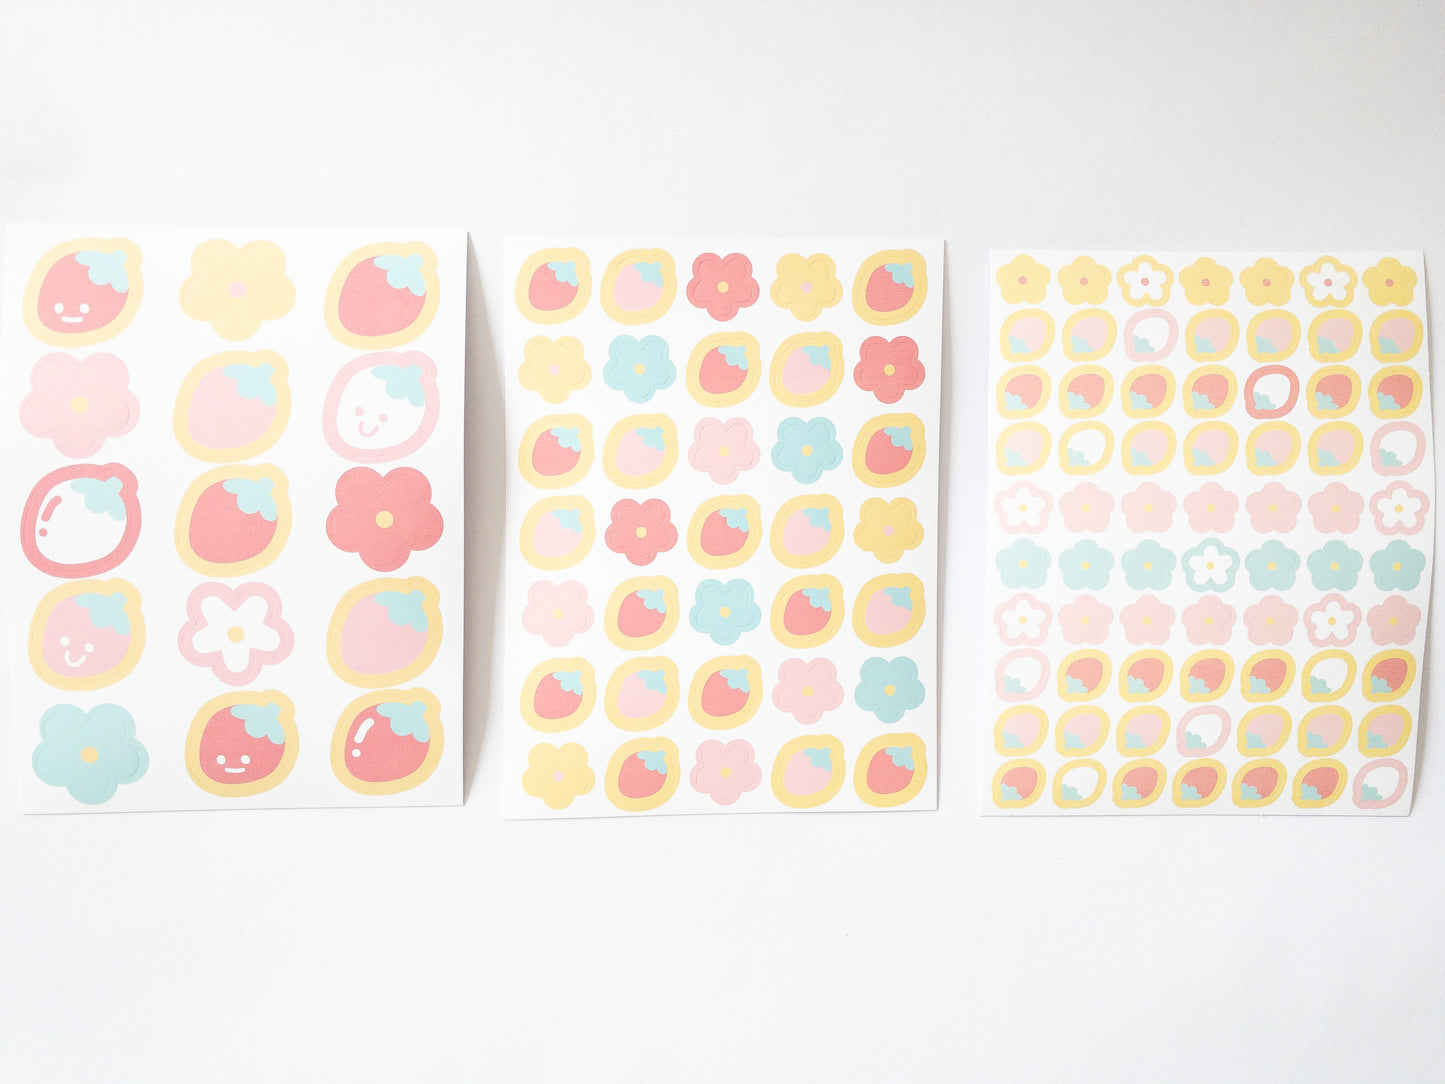 120 Korean style stickers! Three sheets of berry floral goodness. There are 70 mini flowers and strawberries, 35 medium-sized stickers and 15 large happy, smiley strawberries and flowers.